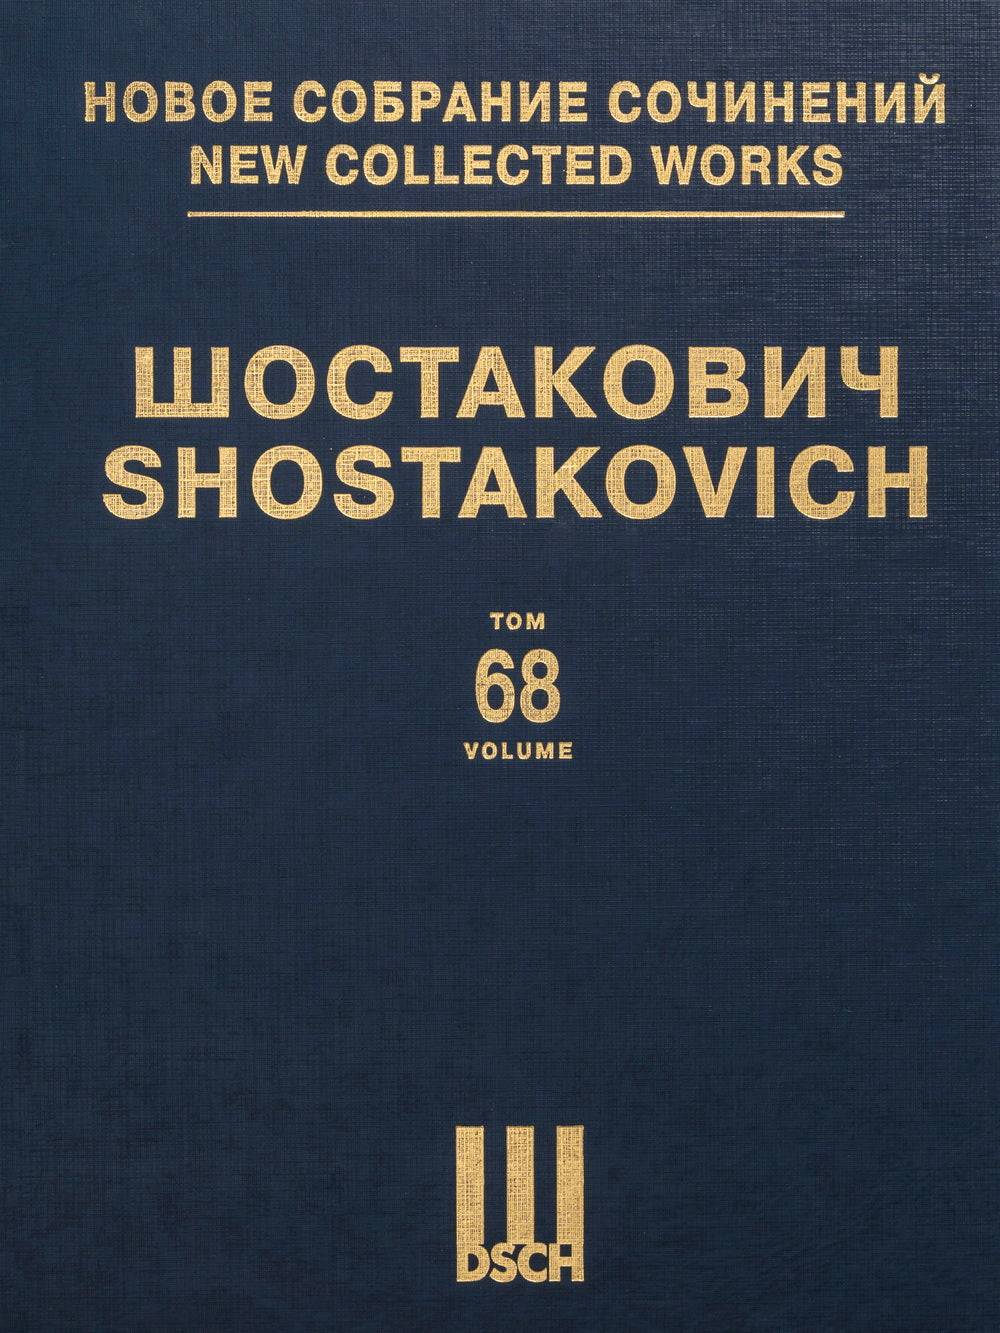 Shostakovich: Suite from The Nose, Op. 15a & Overture and Finale to Armer Columbus, Op. 23